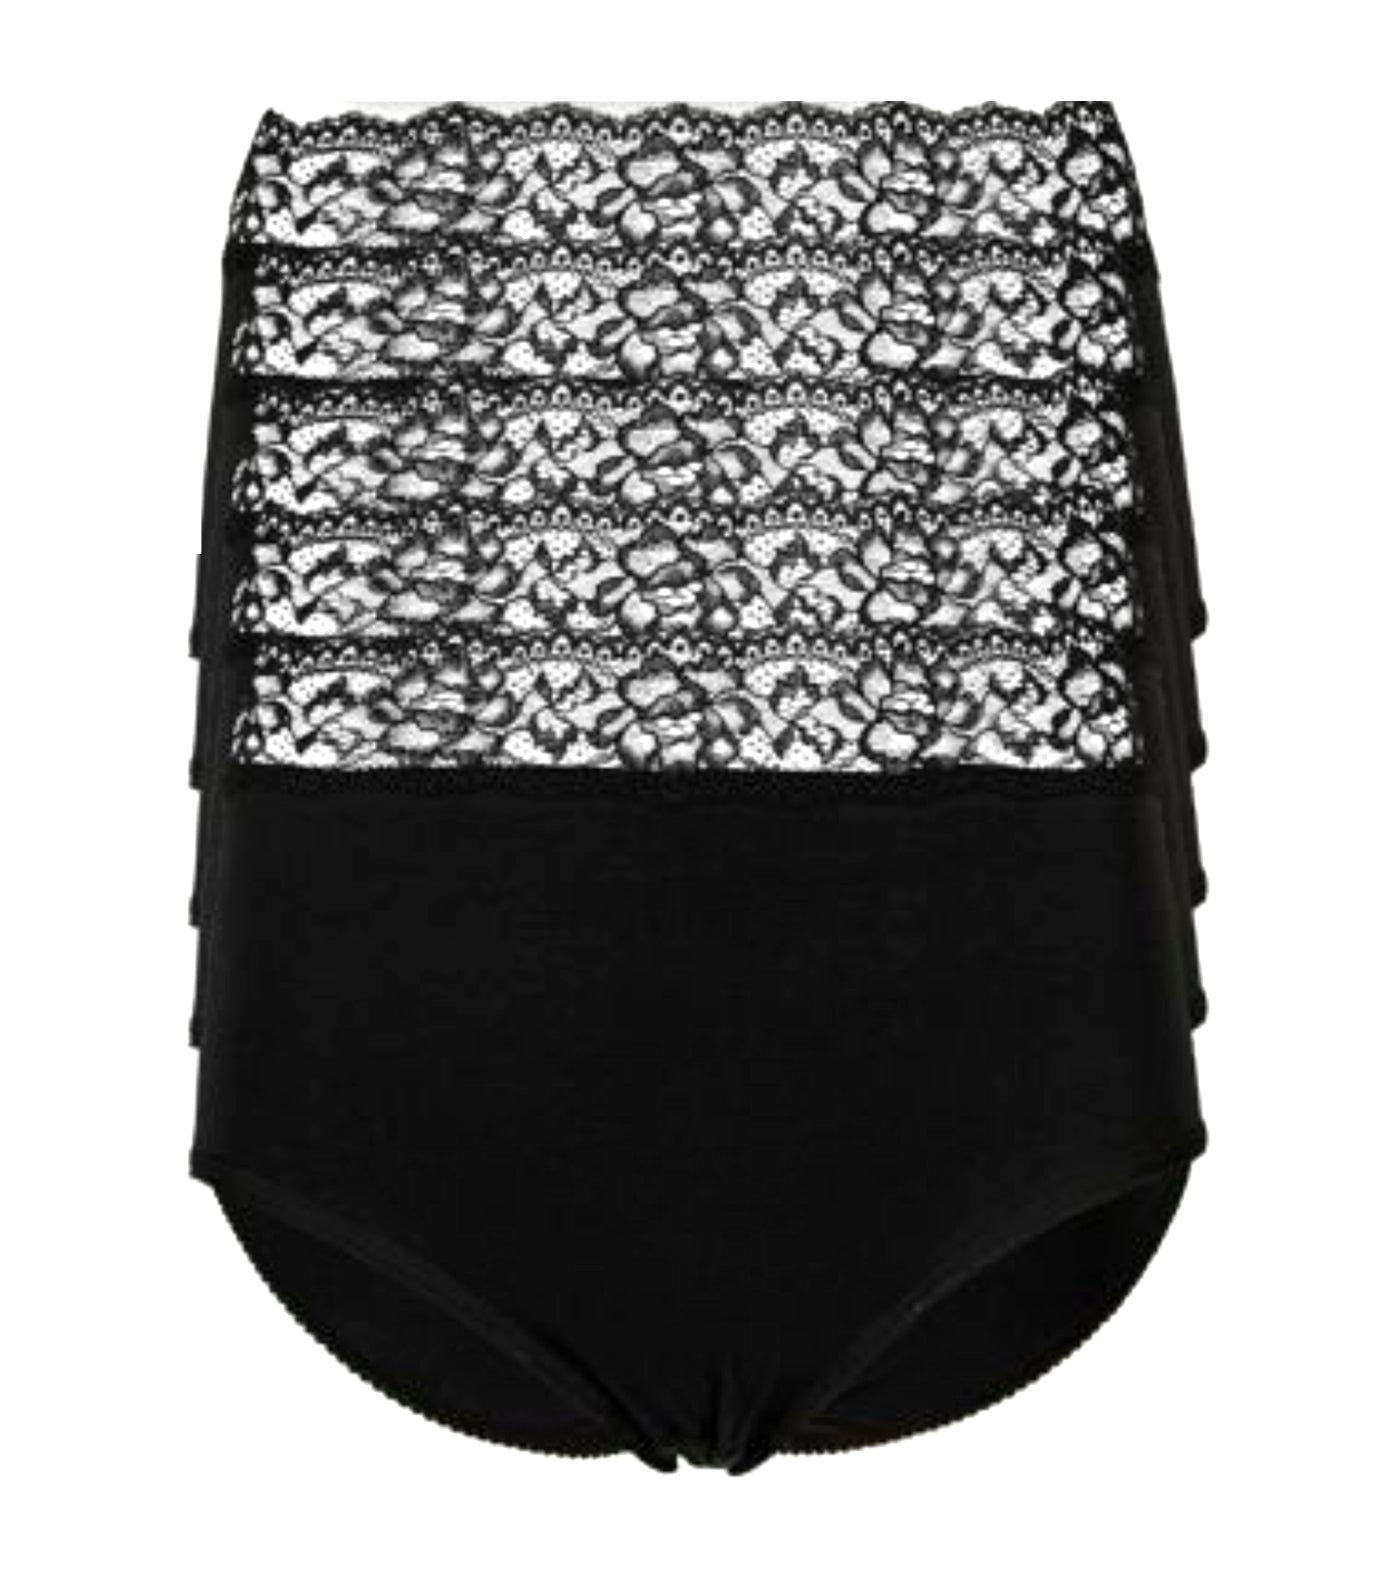 Marks & Spencer 4 Pack Pure Cotton High Leg Knickers - Black